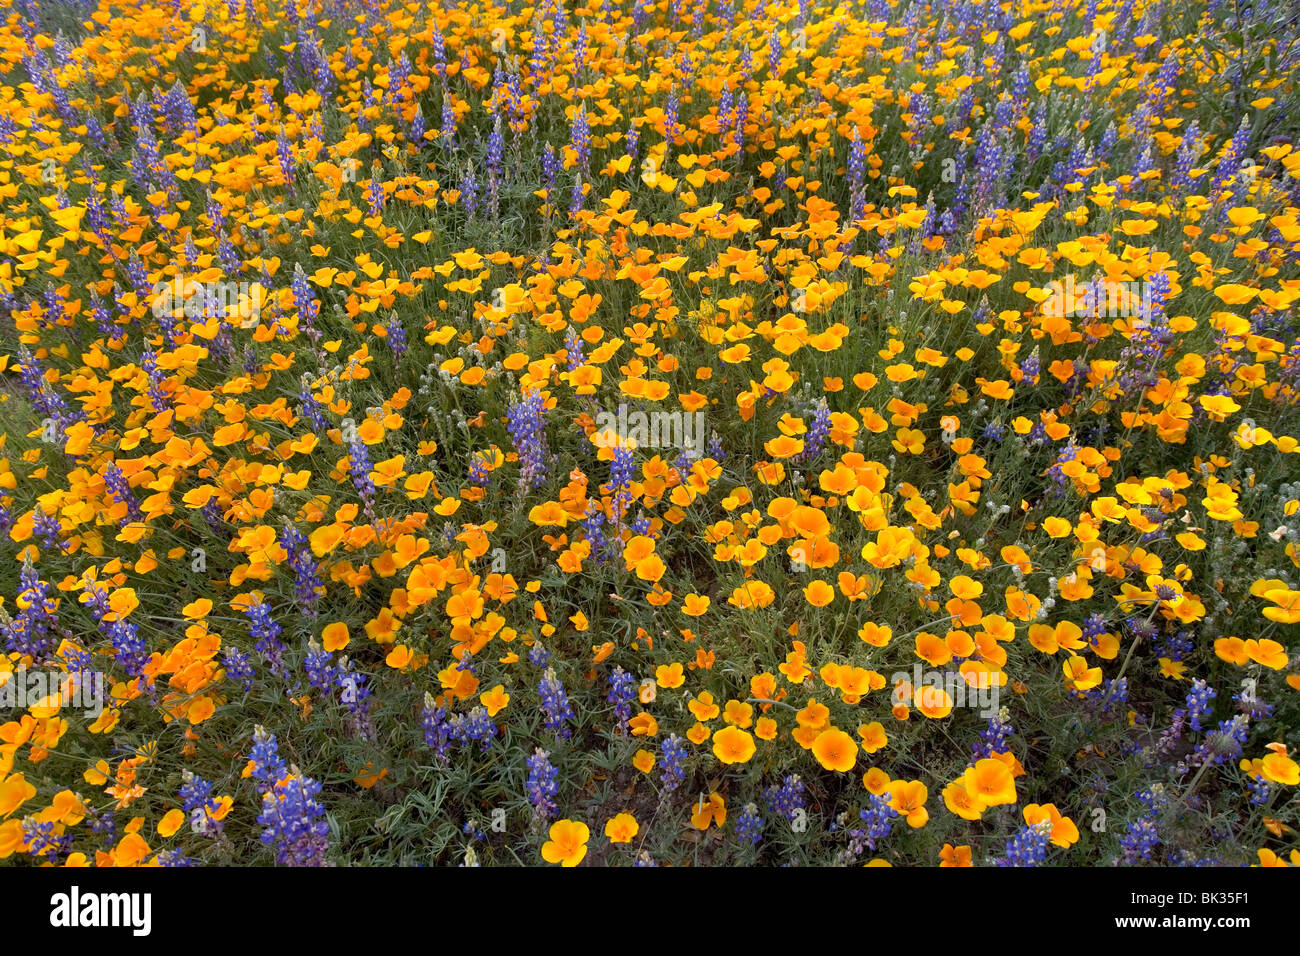 A large field of orange and yellow poppies and purple lupines at Catalina State Park near Tucson, Arizona. Stock Photo